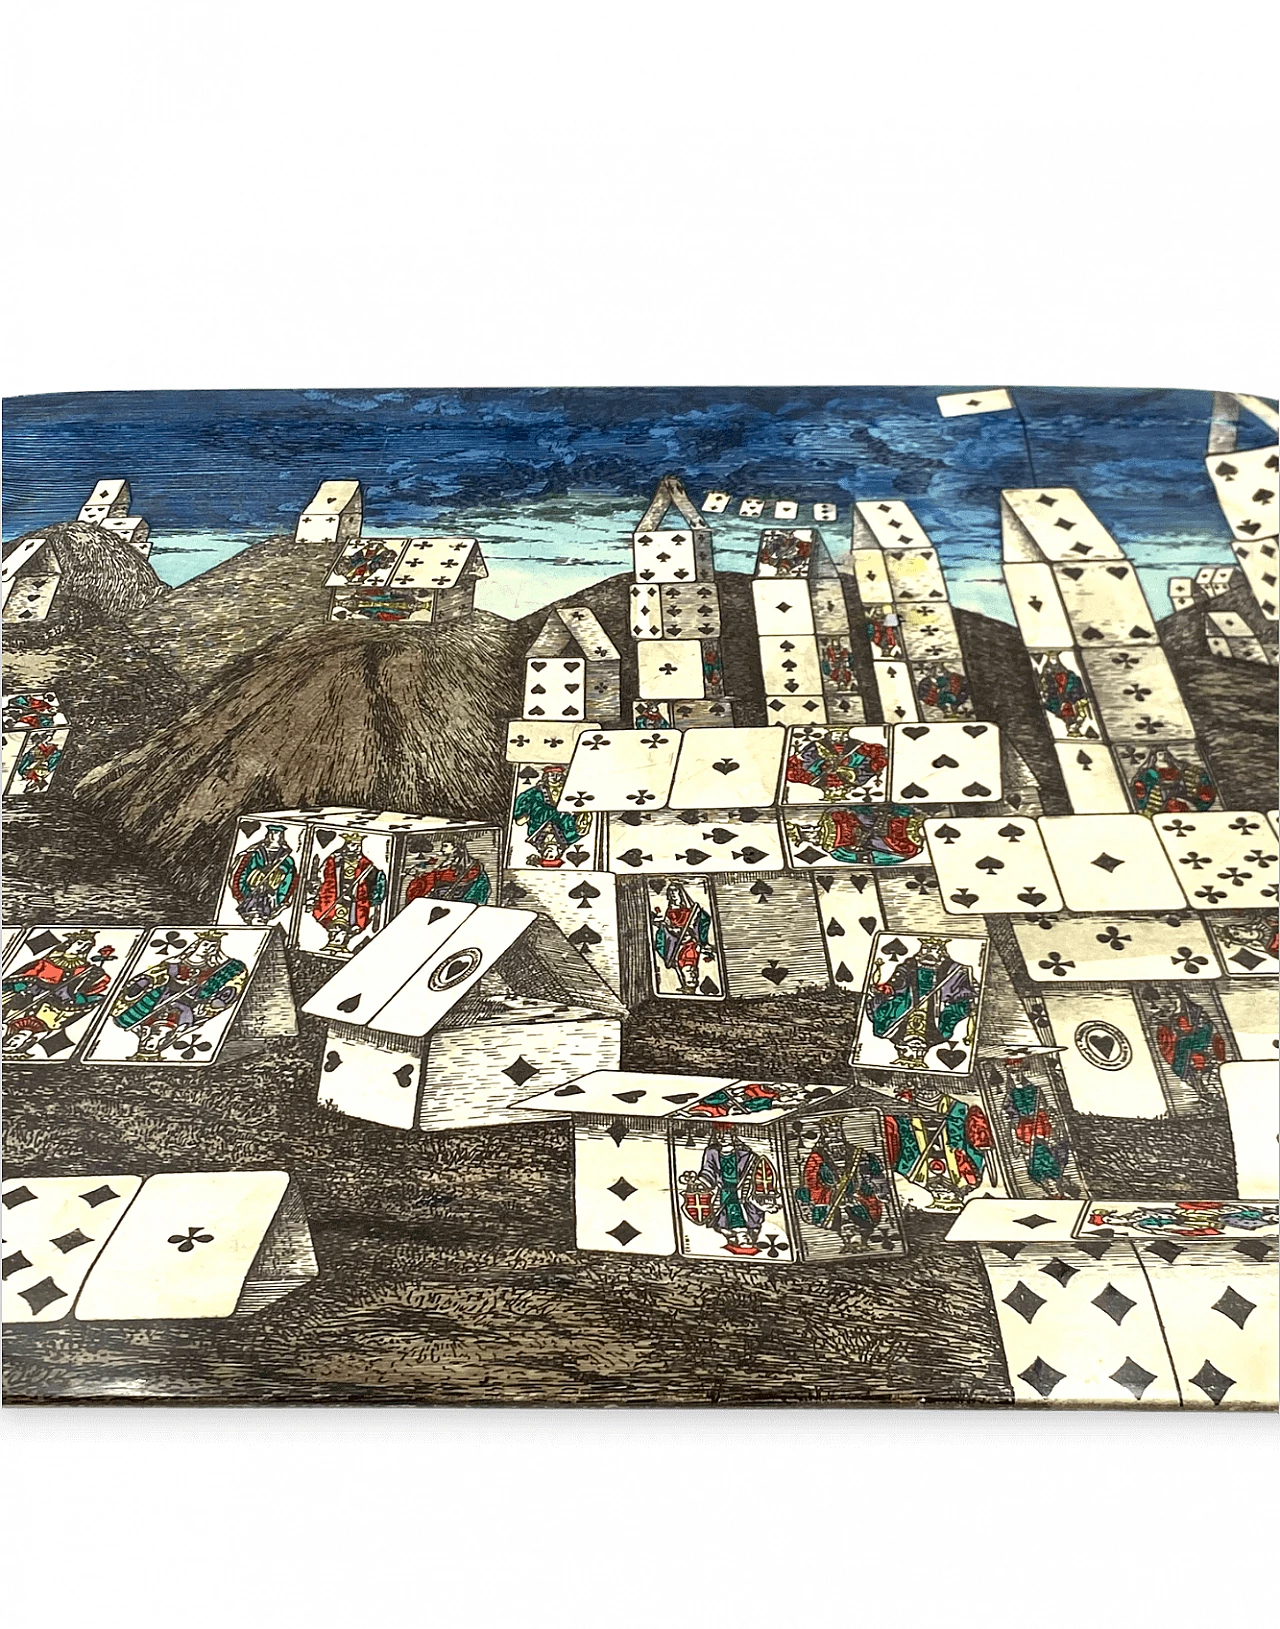 Folding City of Cards coffee table by Piero Fornasetti, 1950s 17